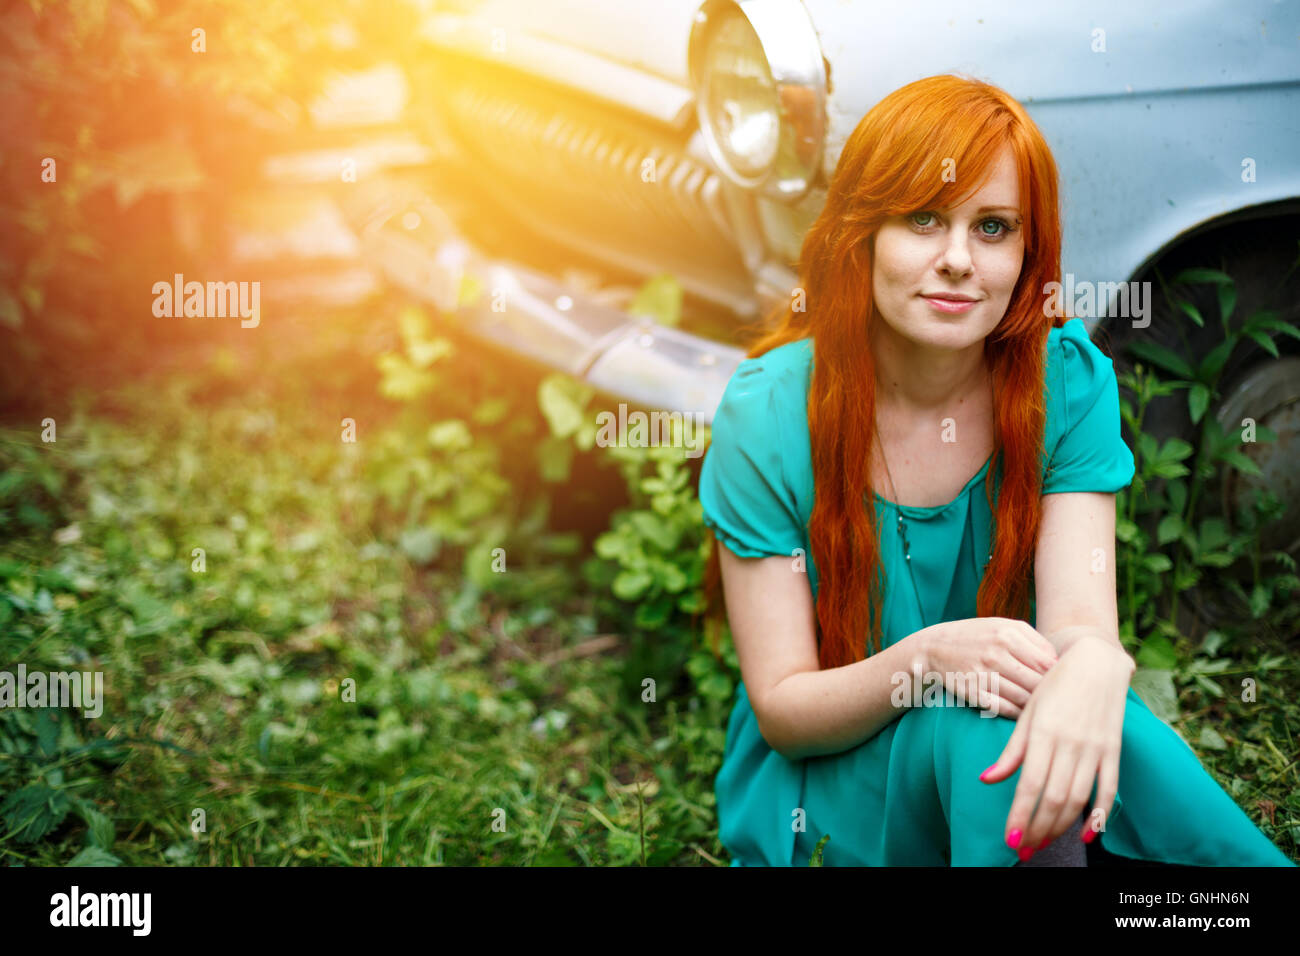 Funny bright young woman posing near vintage abandoned old car. Smiling and sitting in grass. Colored red long hair. Lens flare Stock Photo